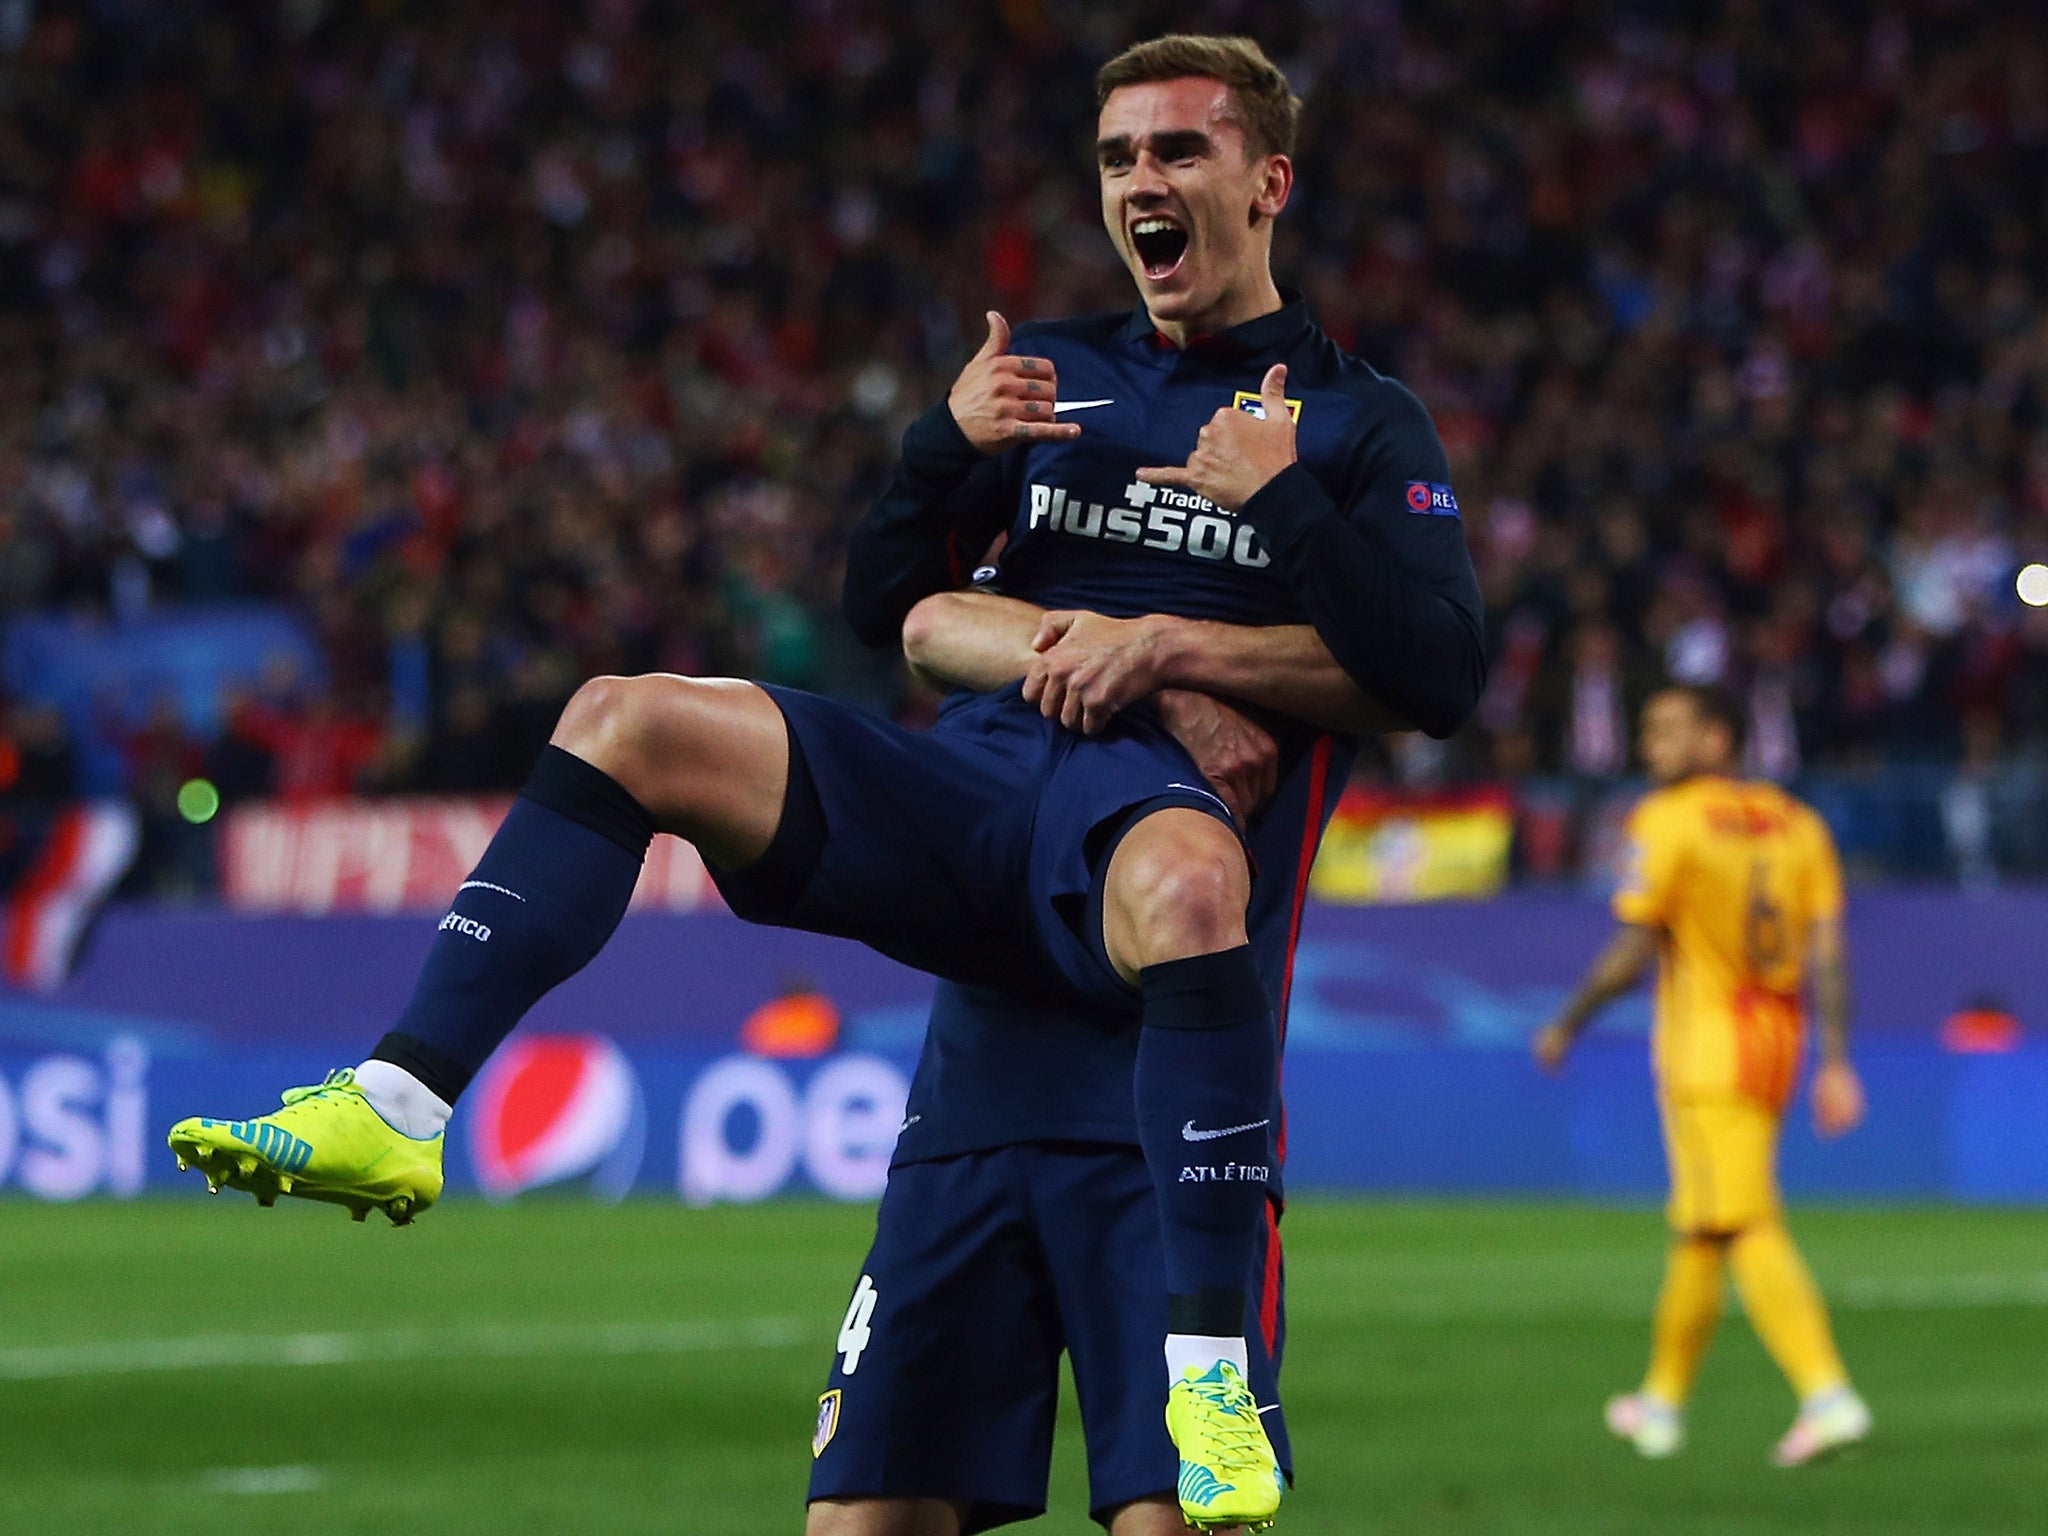 &#13;
Antoine Griezmann will lead the Atletico attack &#13;